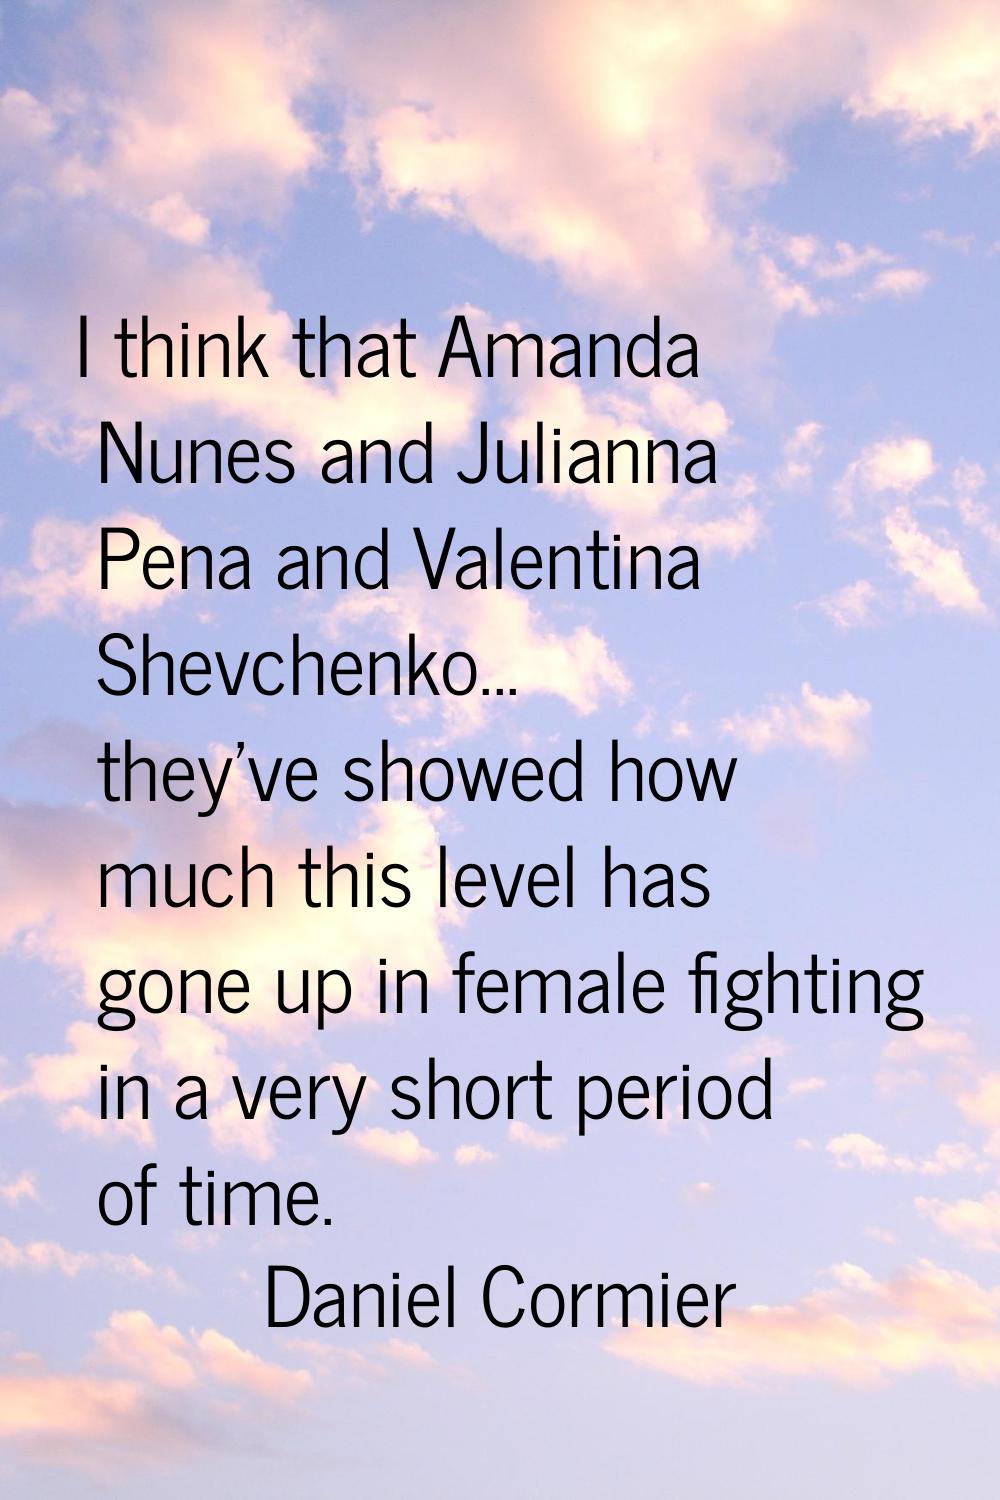 I think that Amanda Nunes and Julianna Pena and Valentina Shevchenko... they've showed how much thi